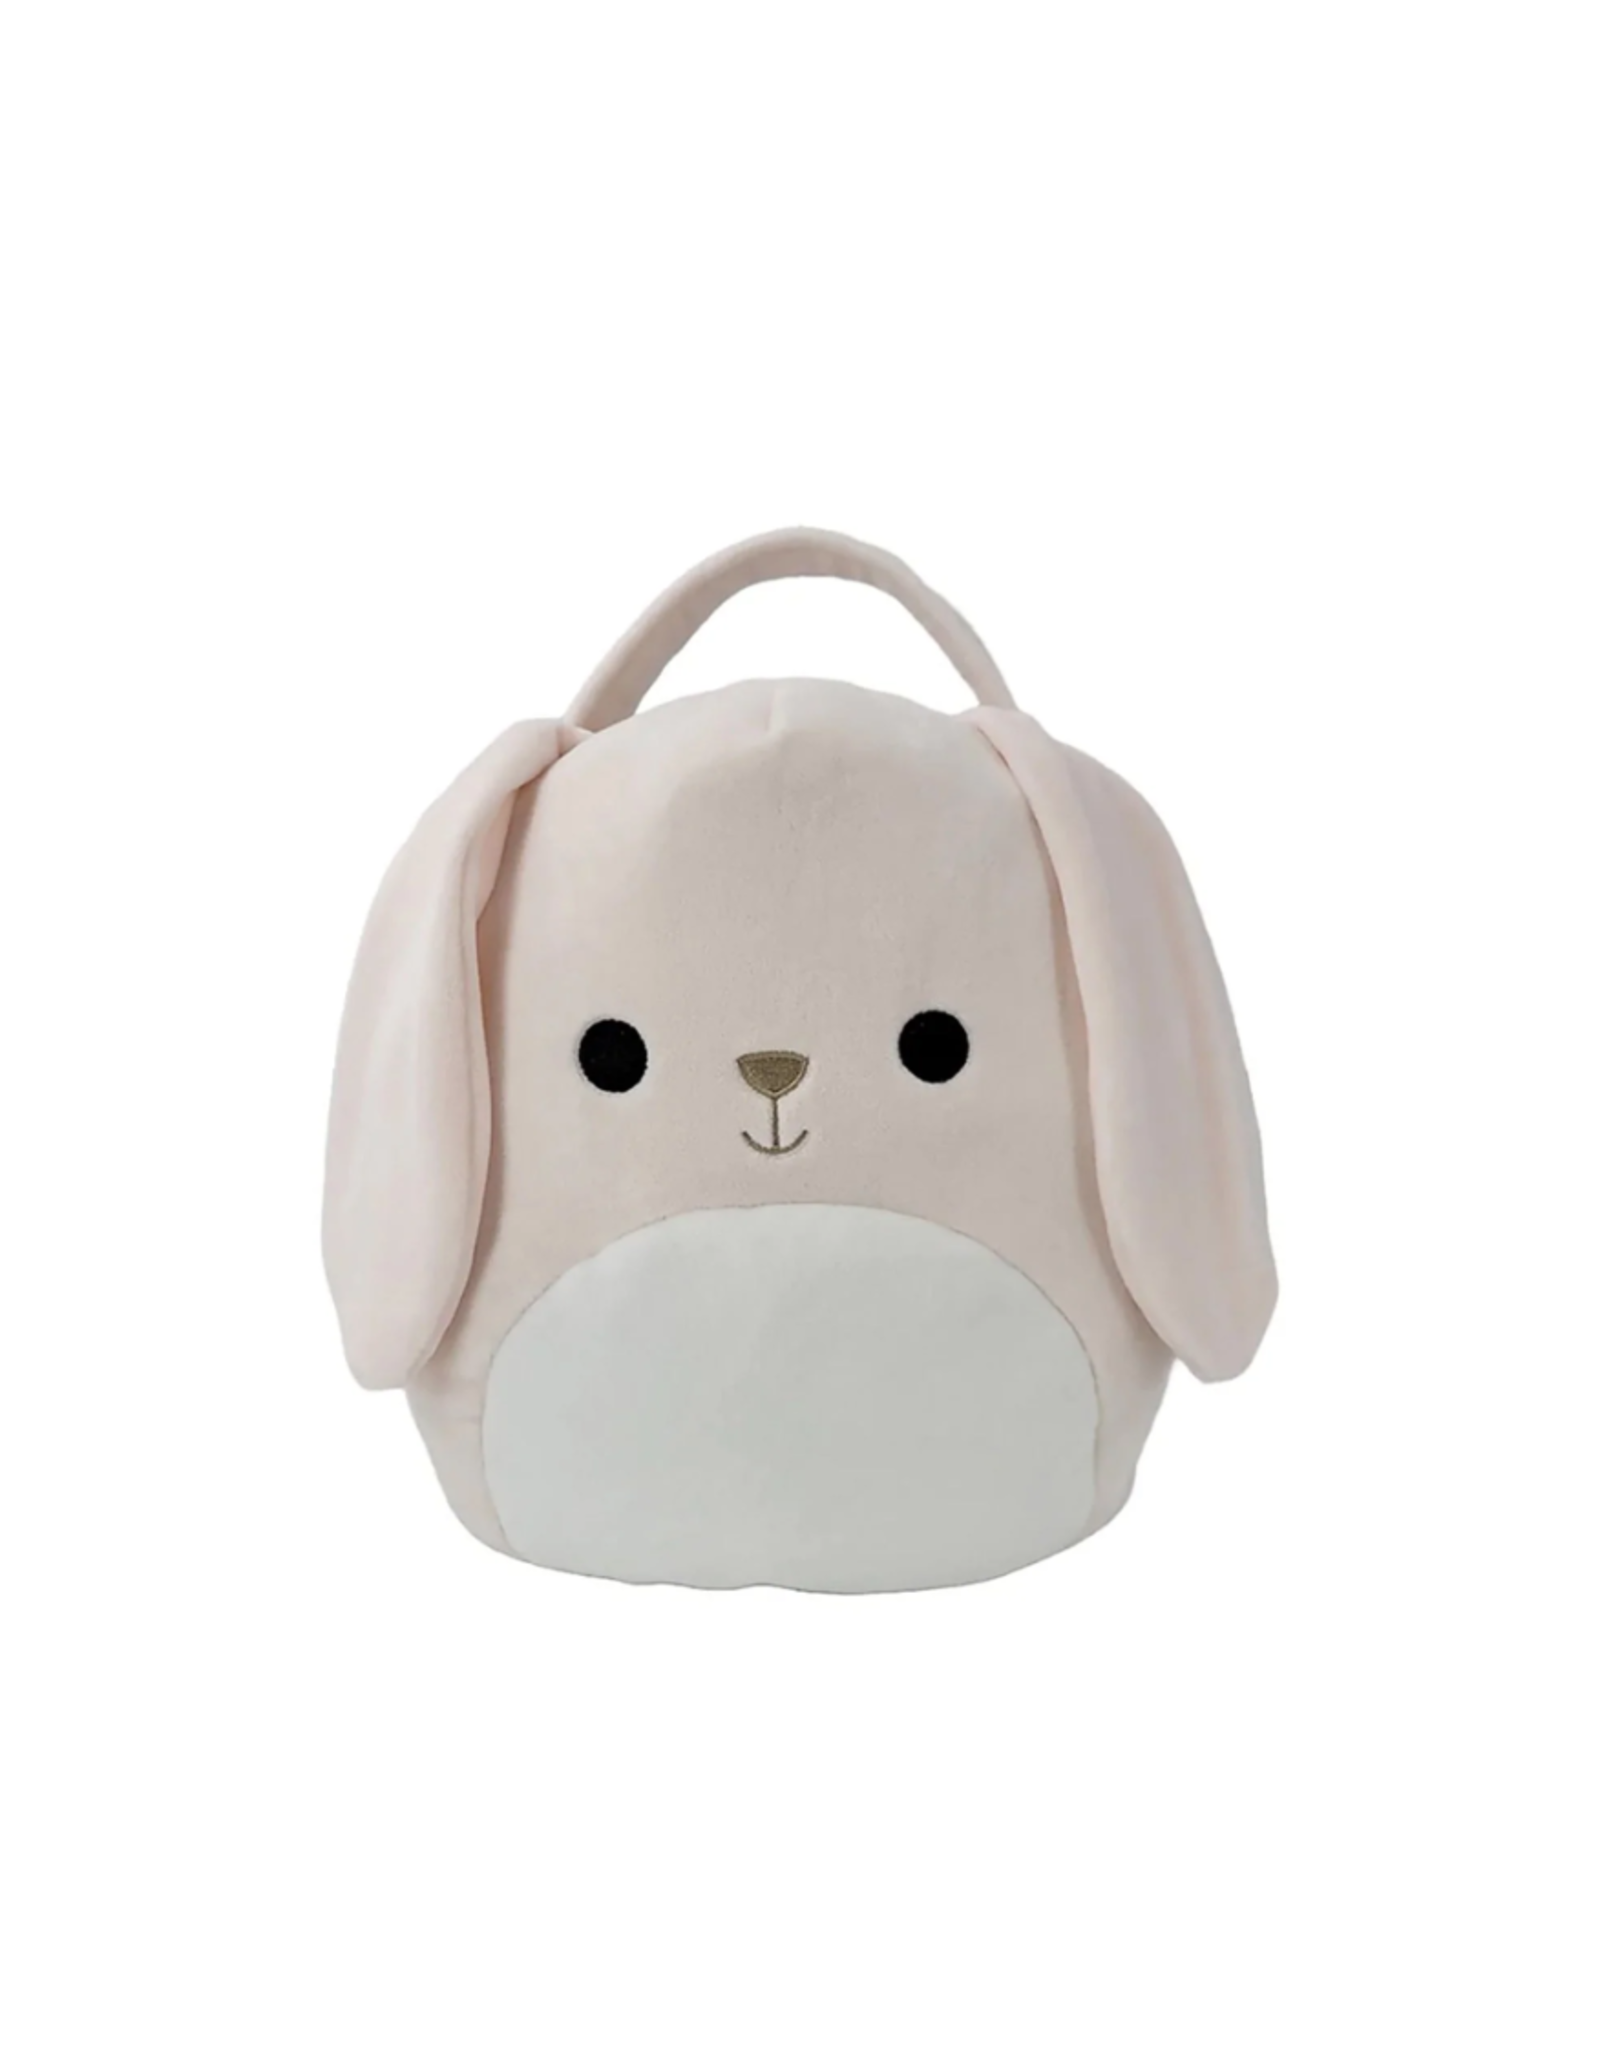 Squishmallows Squishmallows Easter Basket - Valentina the Bunny